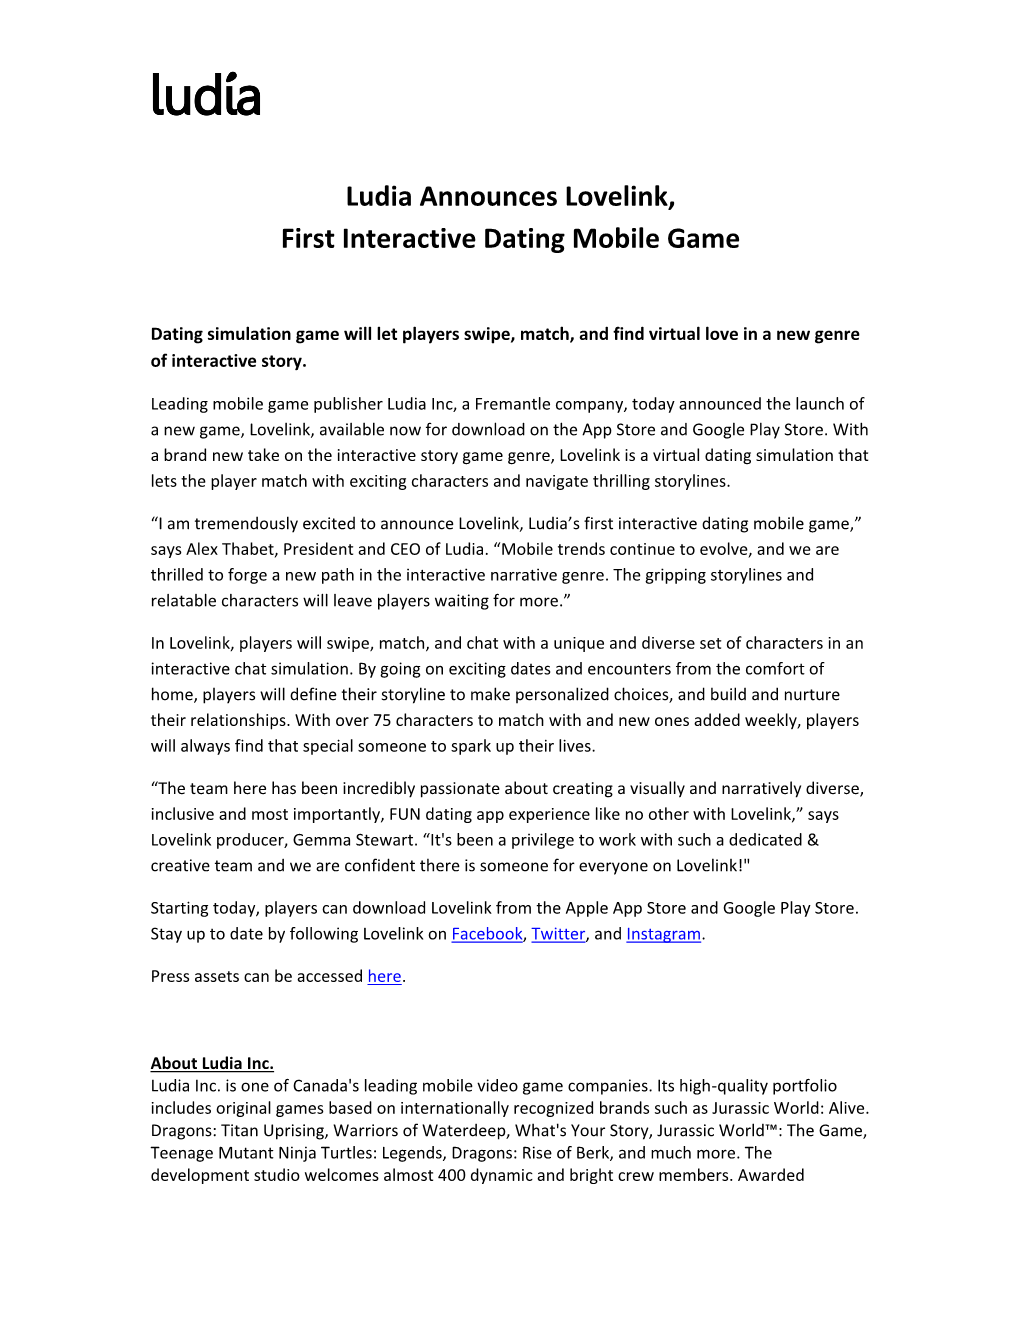 Ludia Announces Lovelink, First Interactive Dating Mobile Game